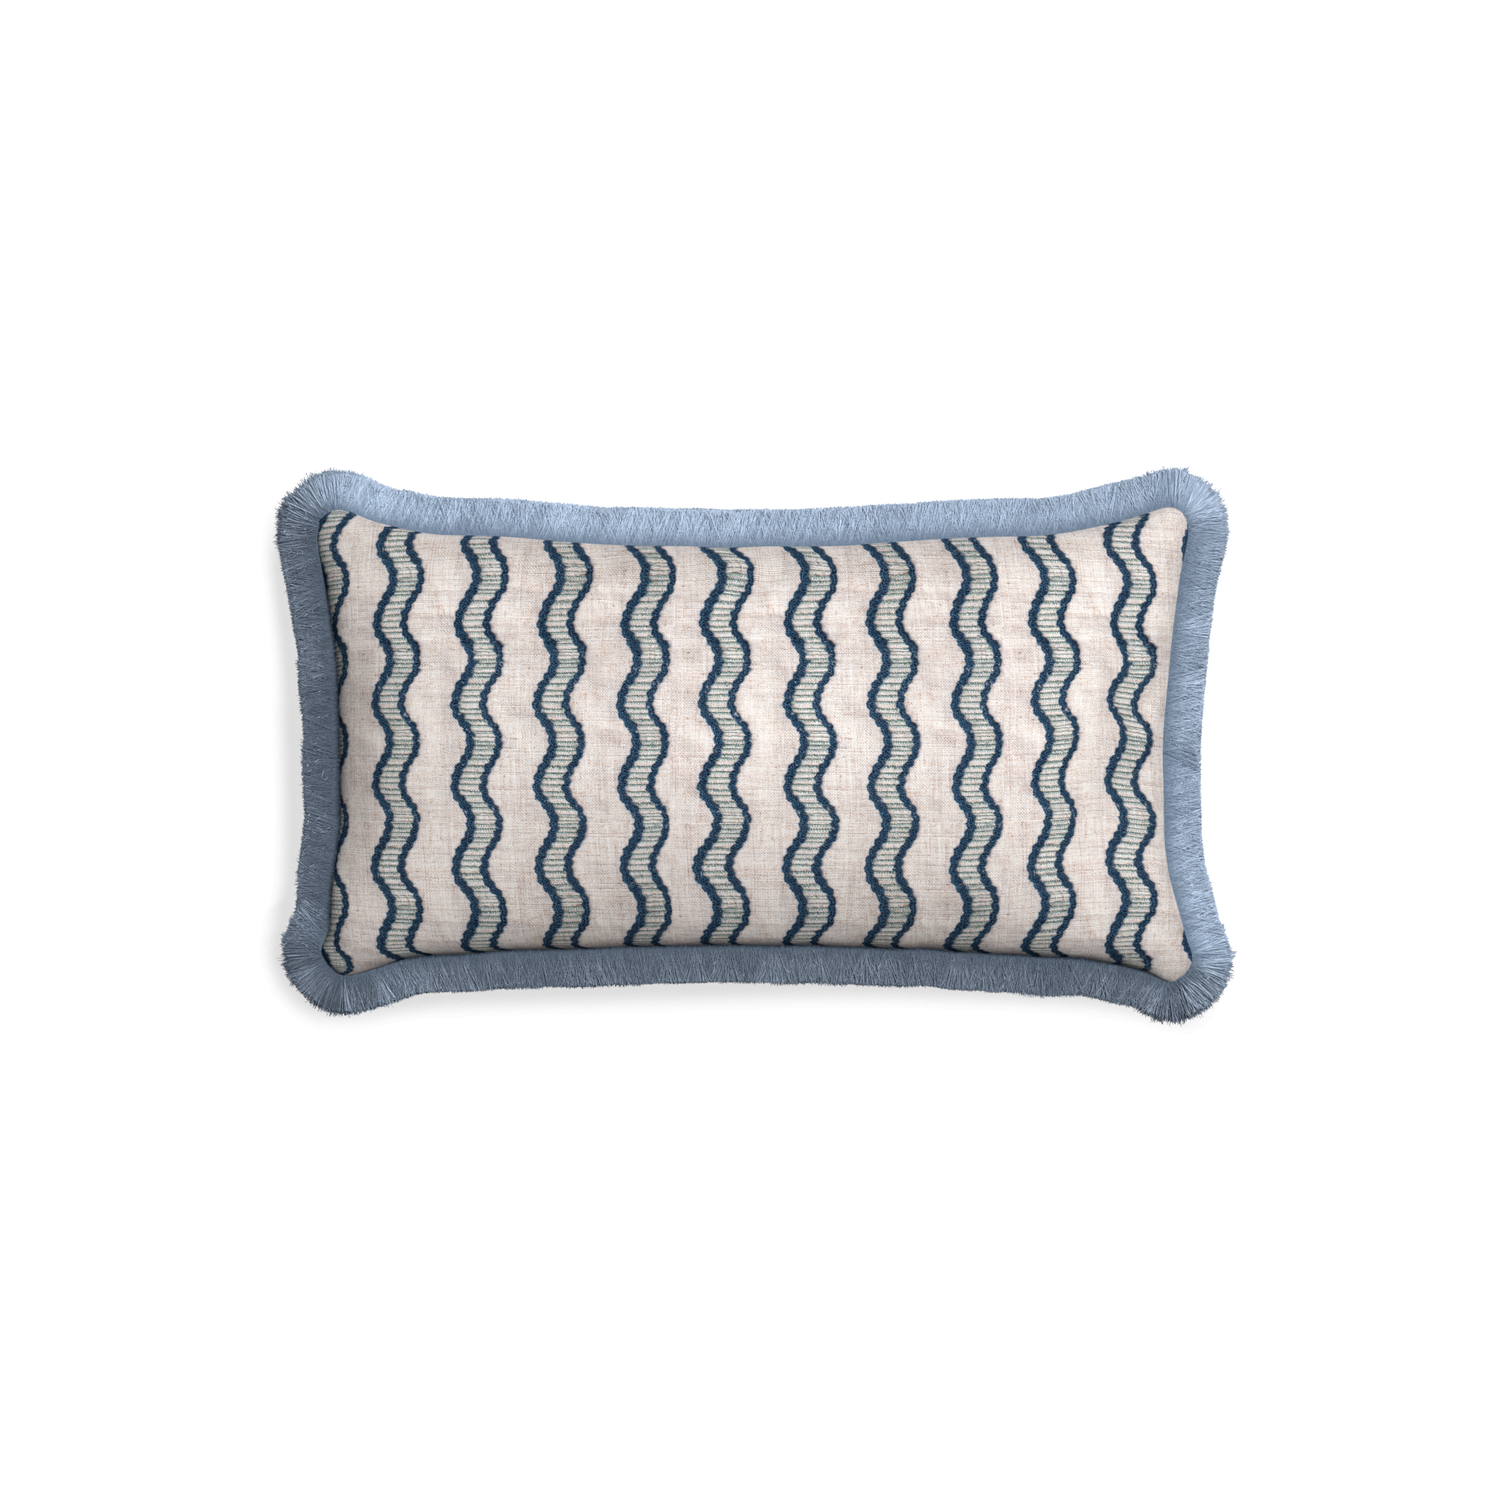 Petite-lumbar beatrice custom embroidered wavepillow with sky fringe on white background